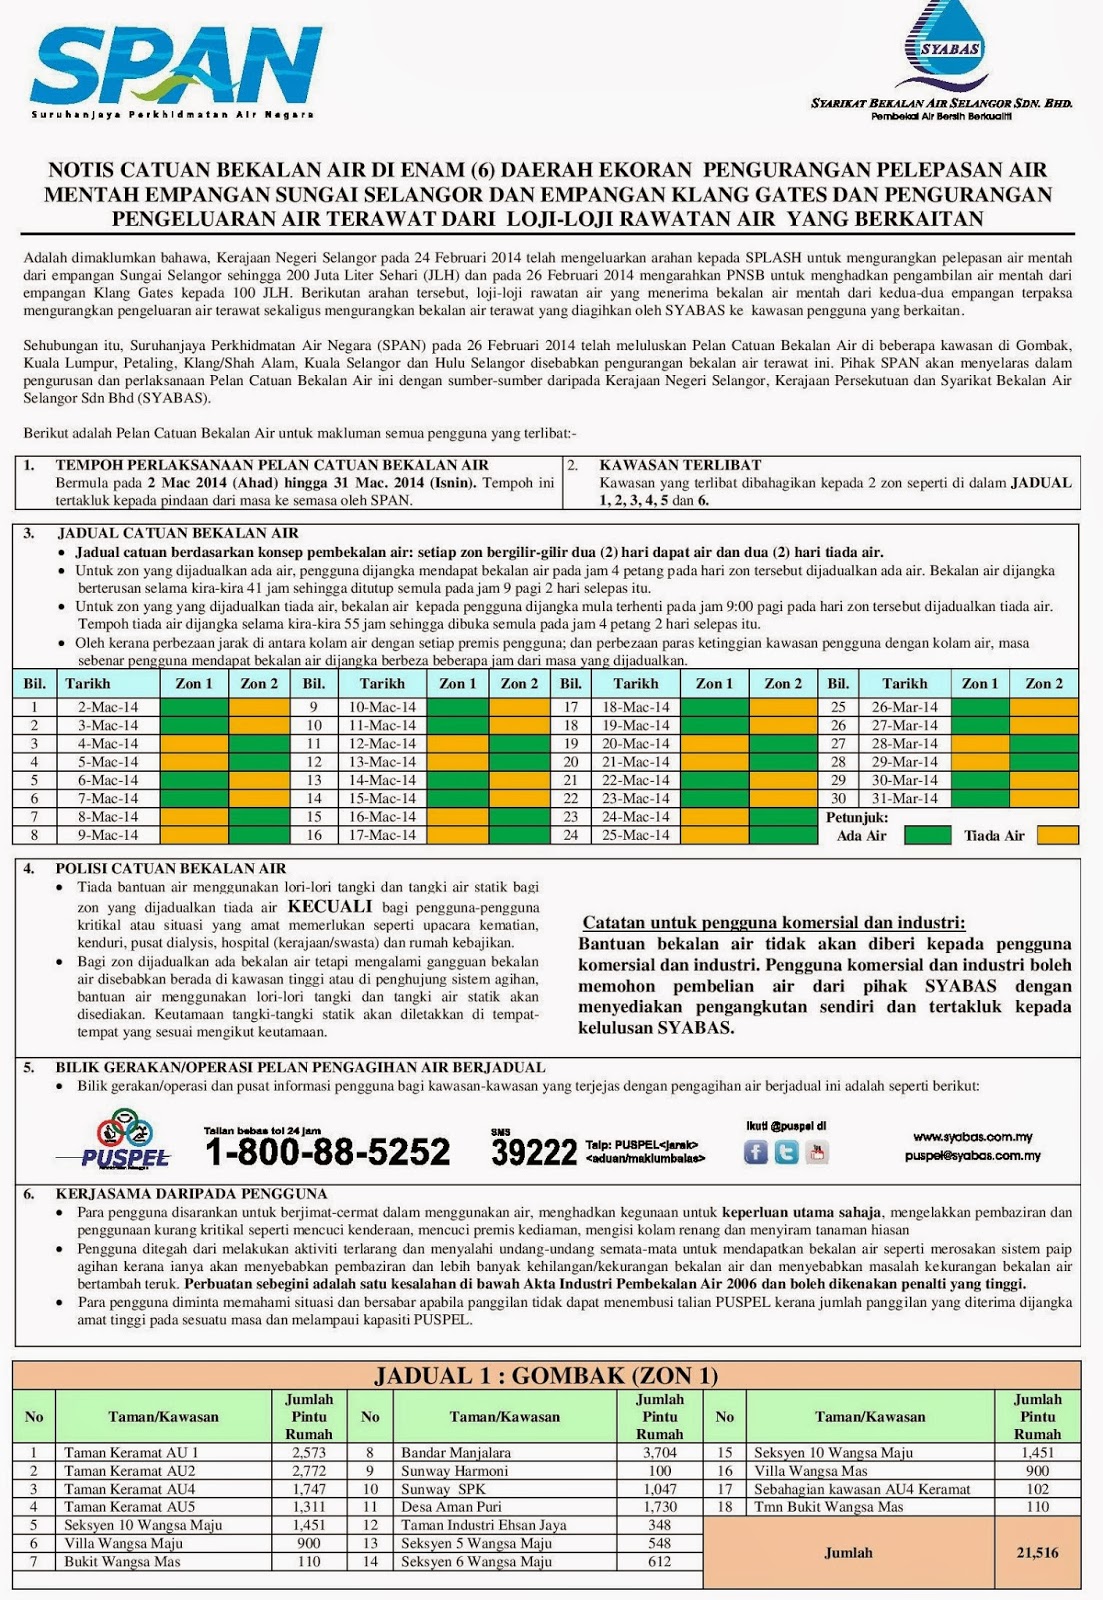 Qualms Of An Antagonist Backup Syabas Listing And Schedule Of Water Rationing 2014 For Selangor Kuala Lumpur Shah Alam And Putrajaya